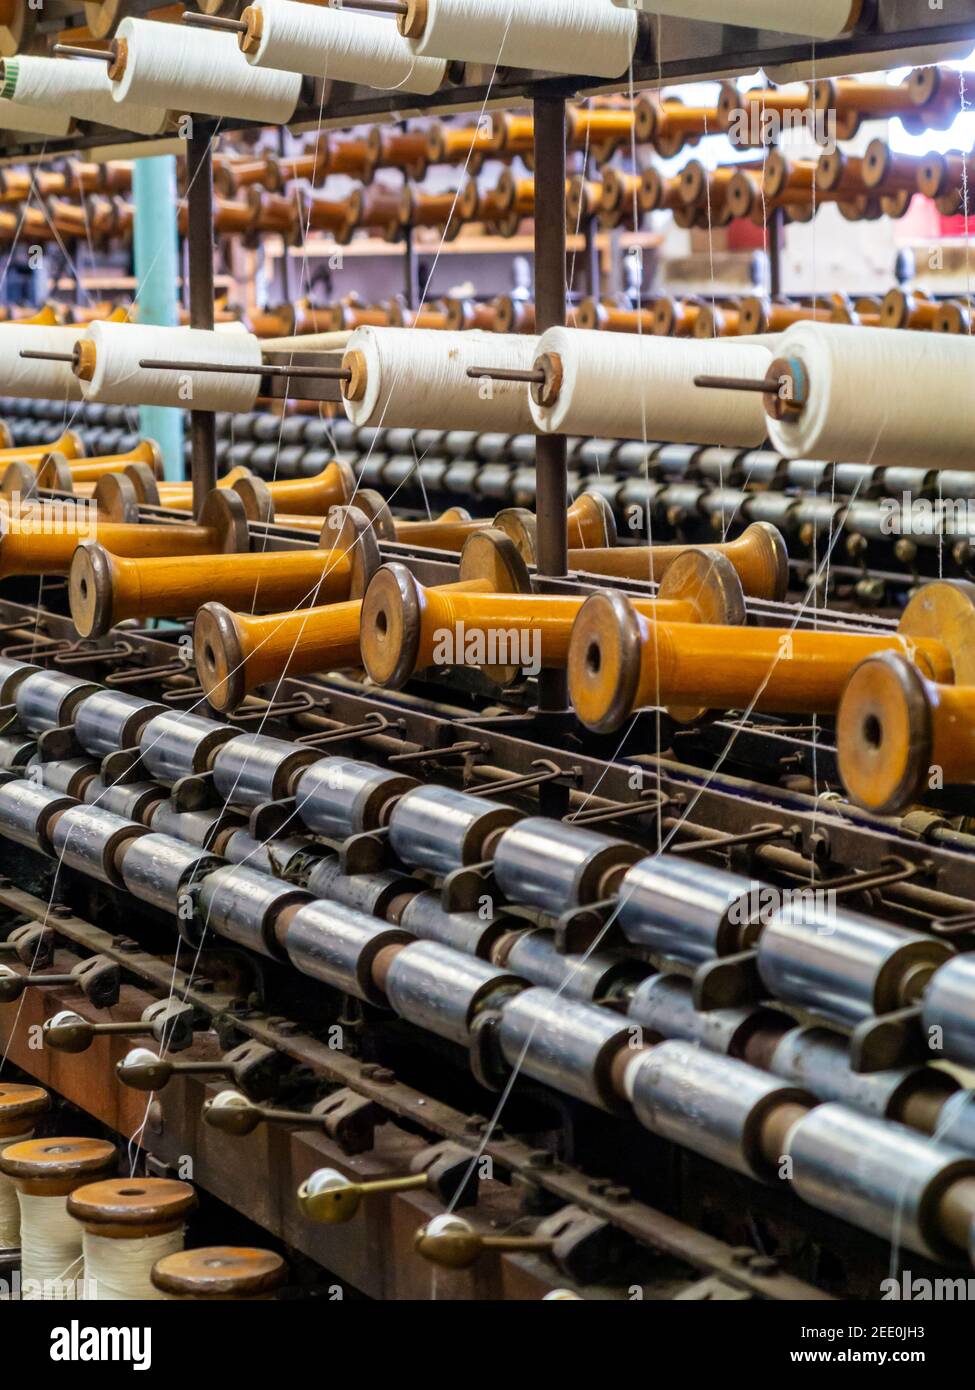 Cotton spinning equipment at Masson Mill in Matlock Bath a village in Derbyshire Dales Peak District England UK formerly a textiles mill. Stock Photo